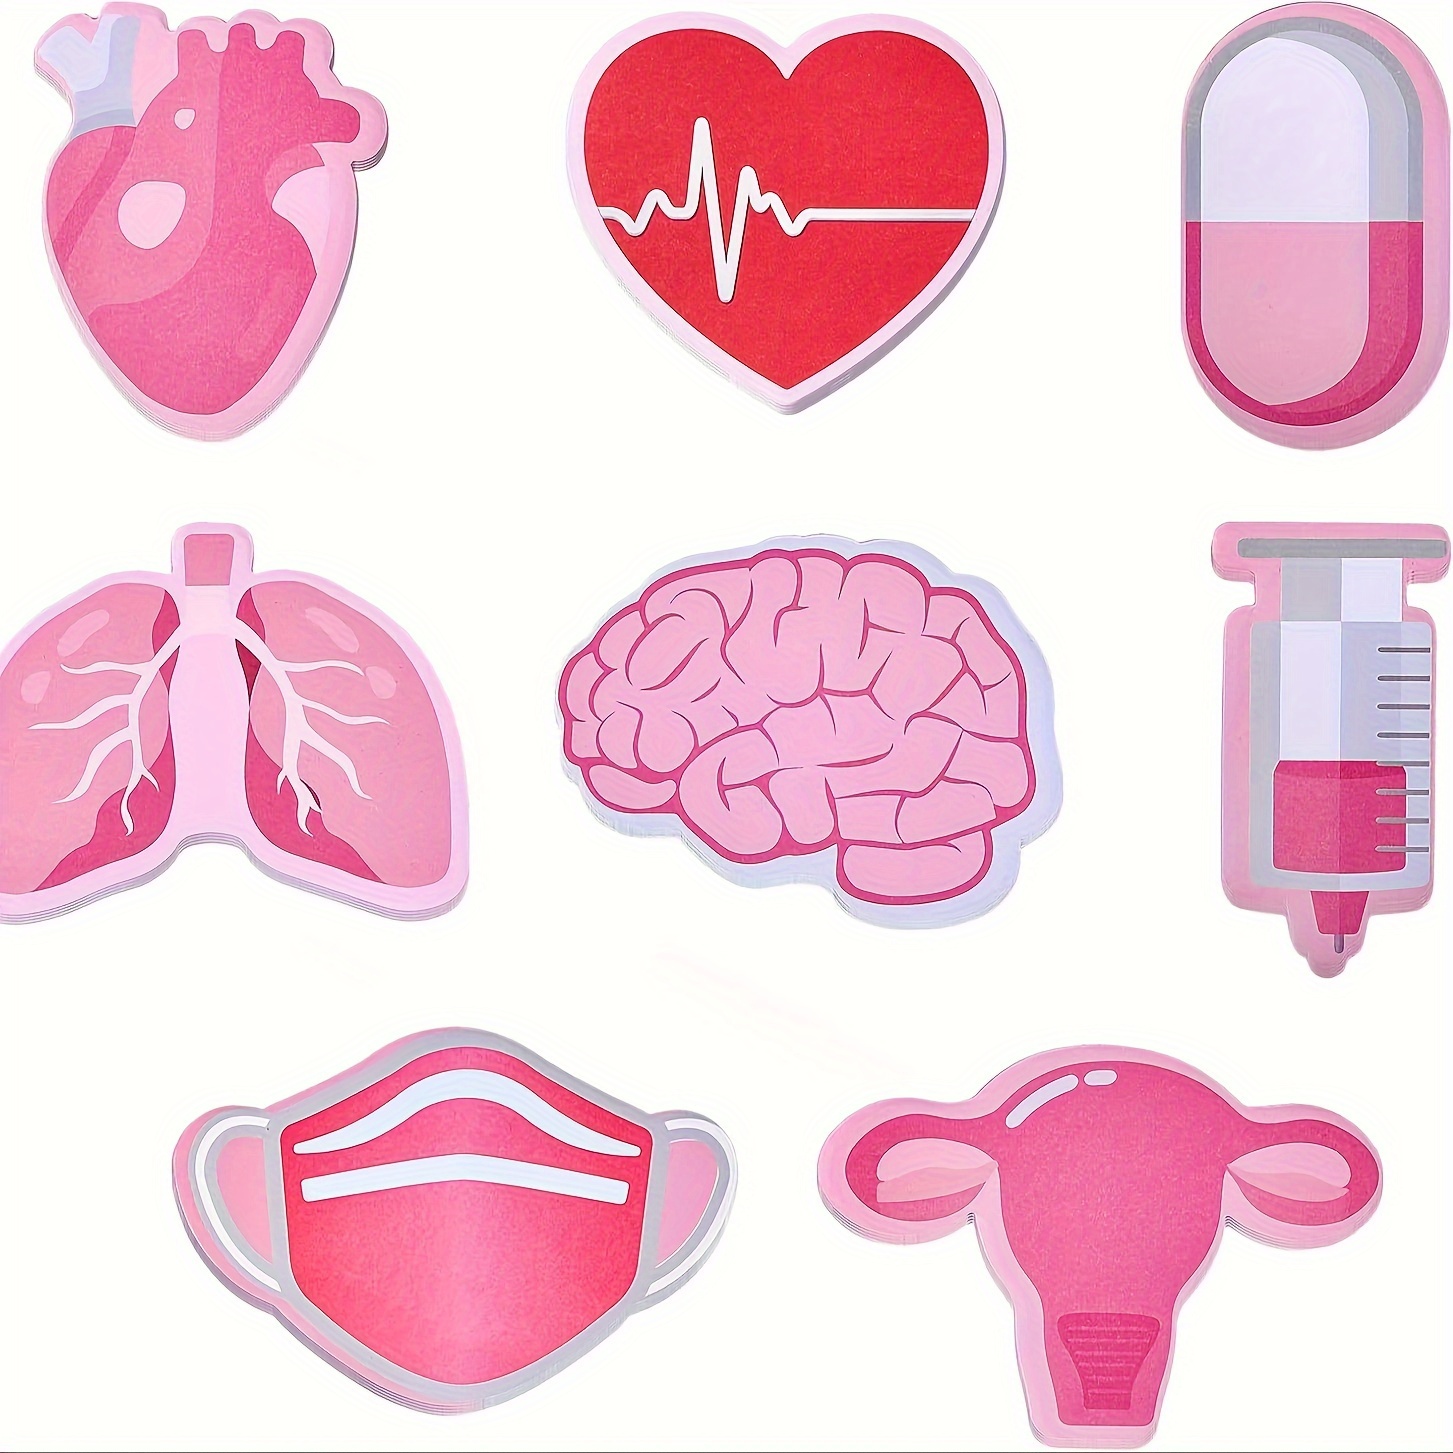 

8pcs Mini Funny Nurse Sticky Notes, Nursing Student School Stationary Essentials Nurse Gifts Booklet Self Stick Note Pads For Hospital Supplies